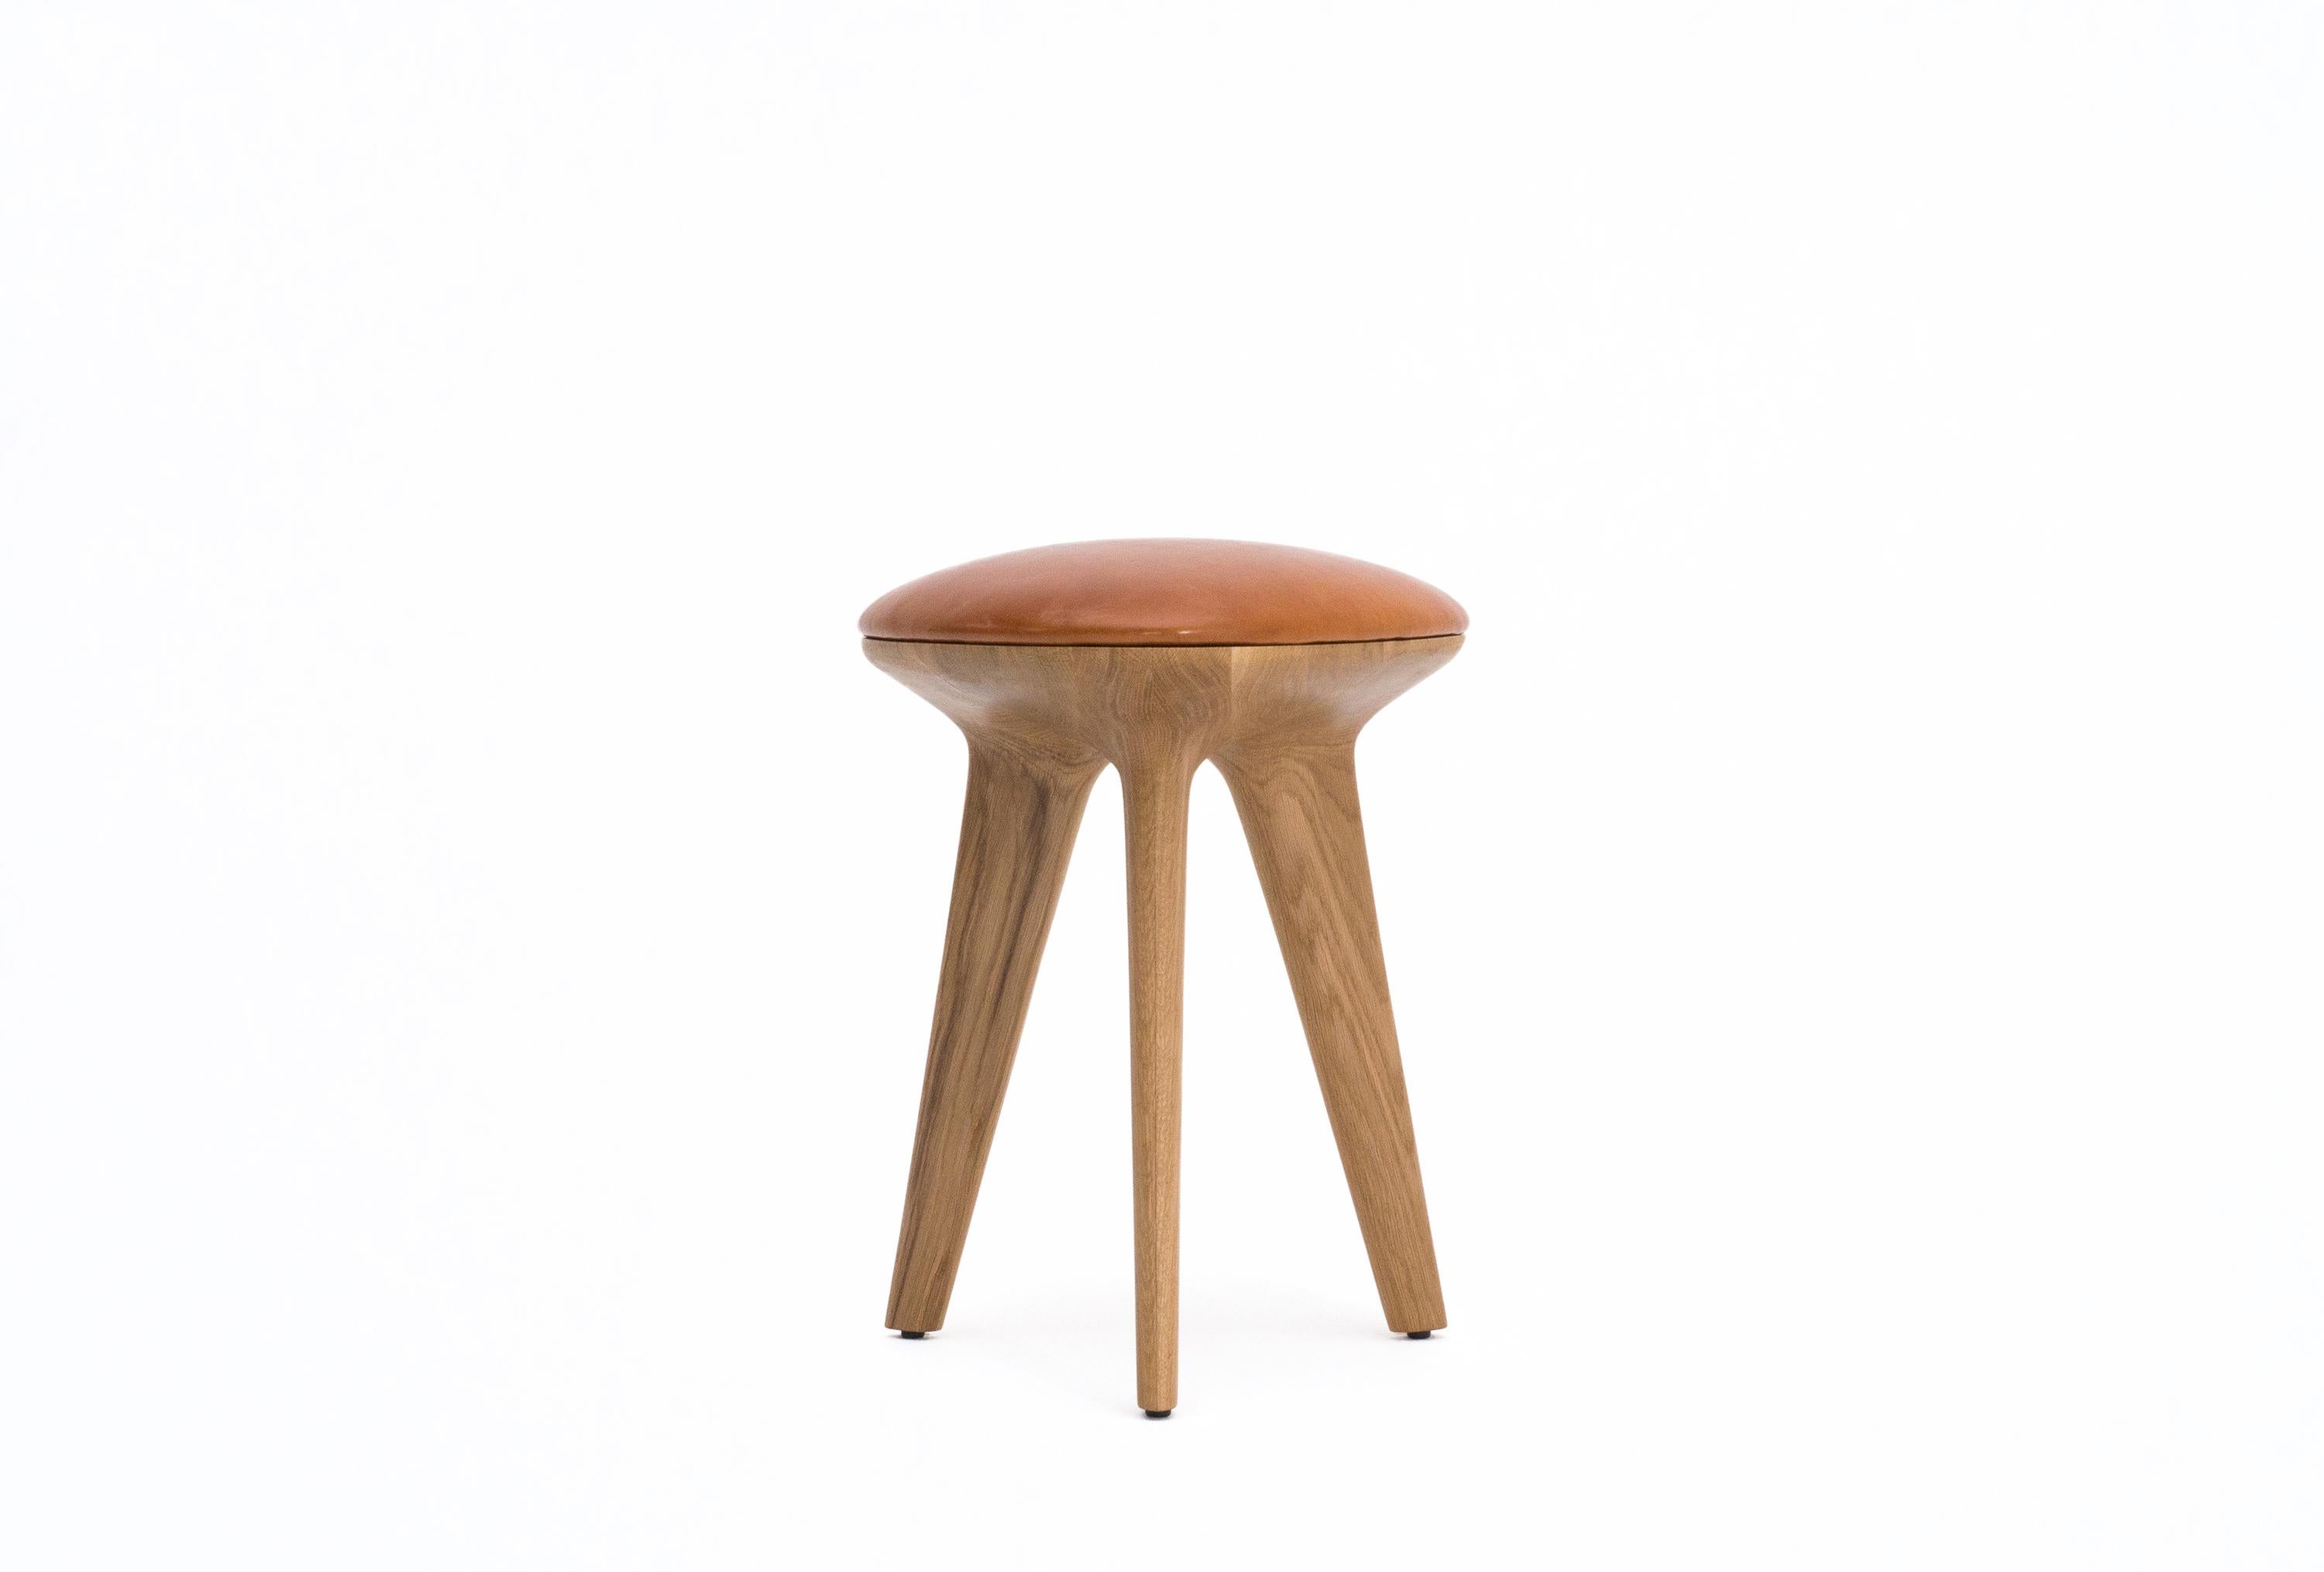 Inspired by the Reuleaux rotating triangle, the form of the Rotor stool is based on the intersection of three circles. The CNC-cut organic shape celebrates ‘the curve of constant width'. Available as a comfortable stool in oak or ebonized oak with